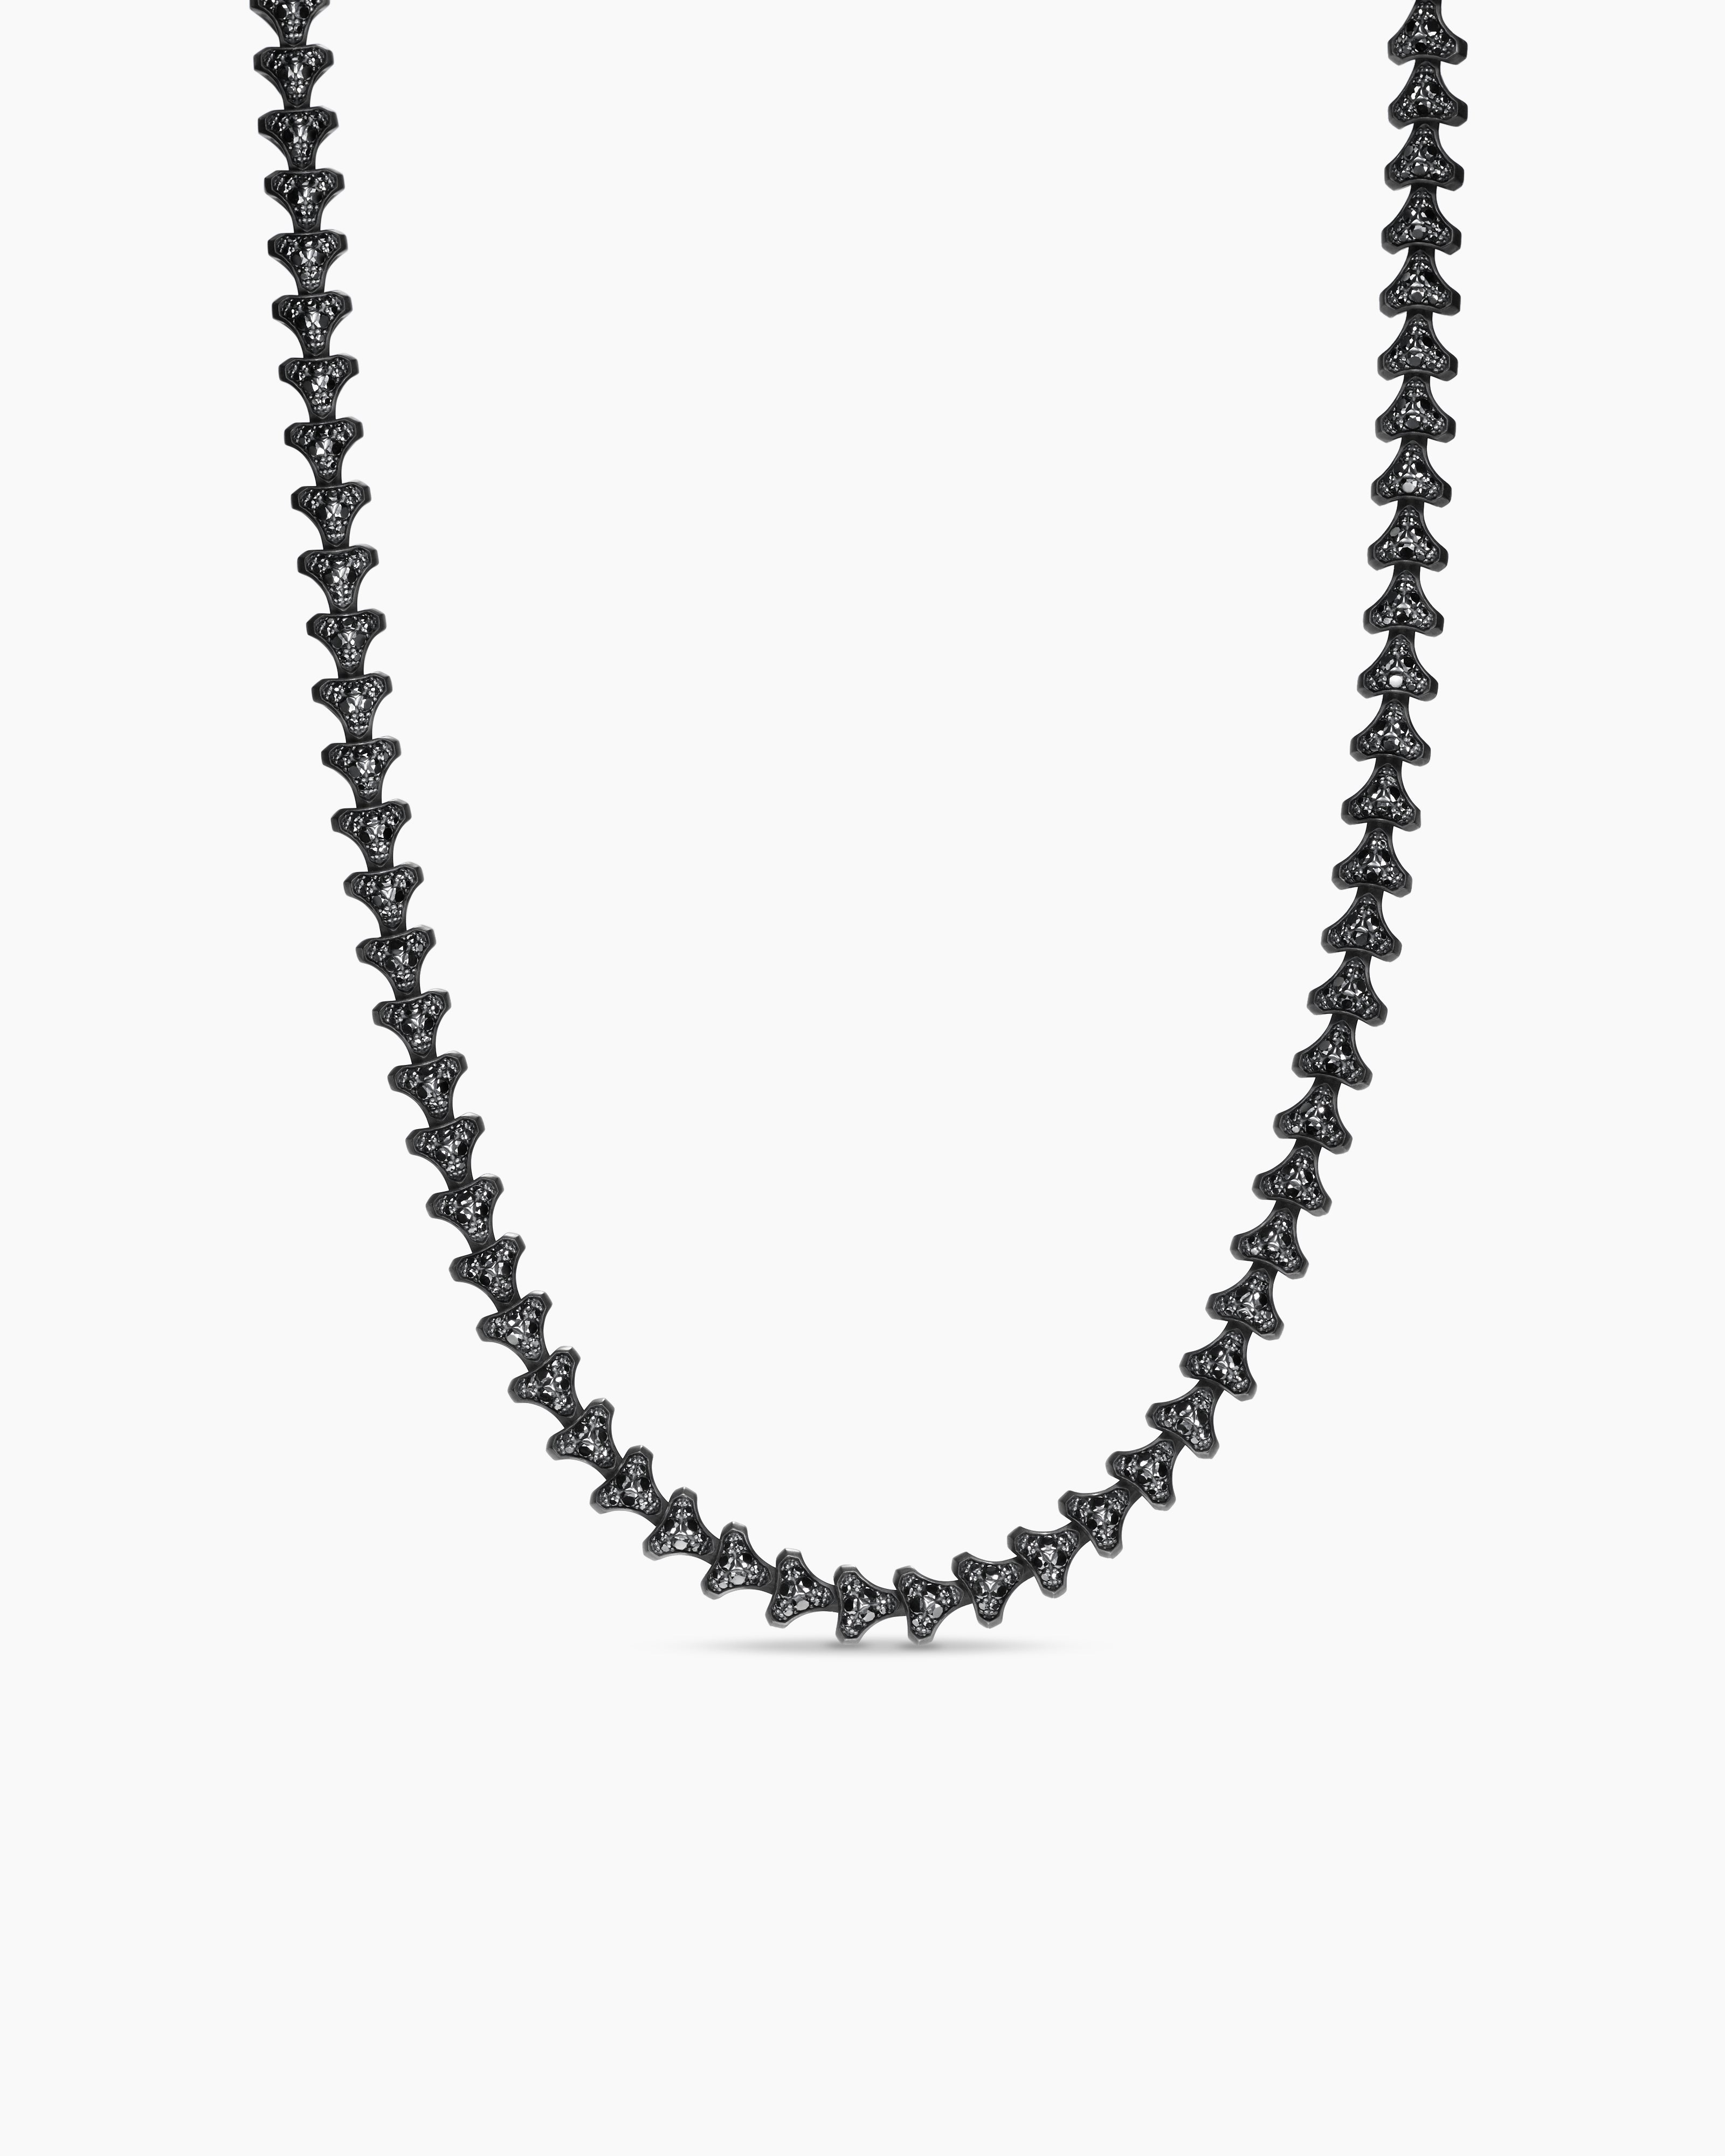 Tenvis, 1/8 (3 mm) Black Leather Necklace, In stock!